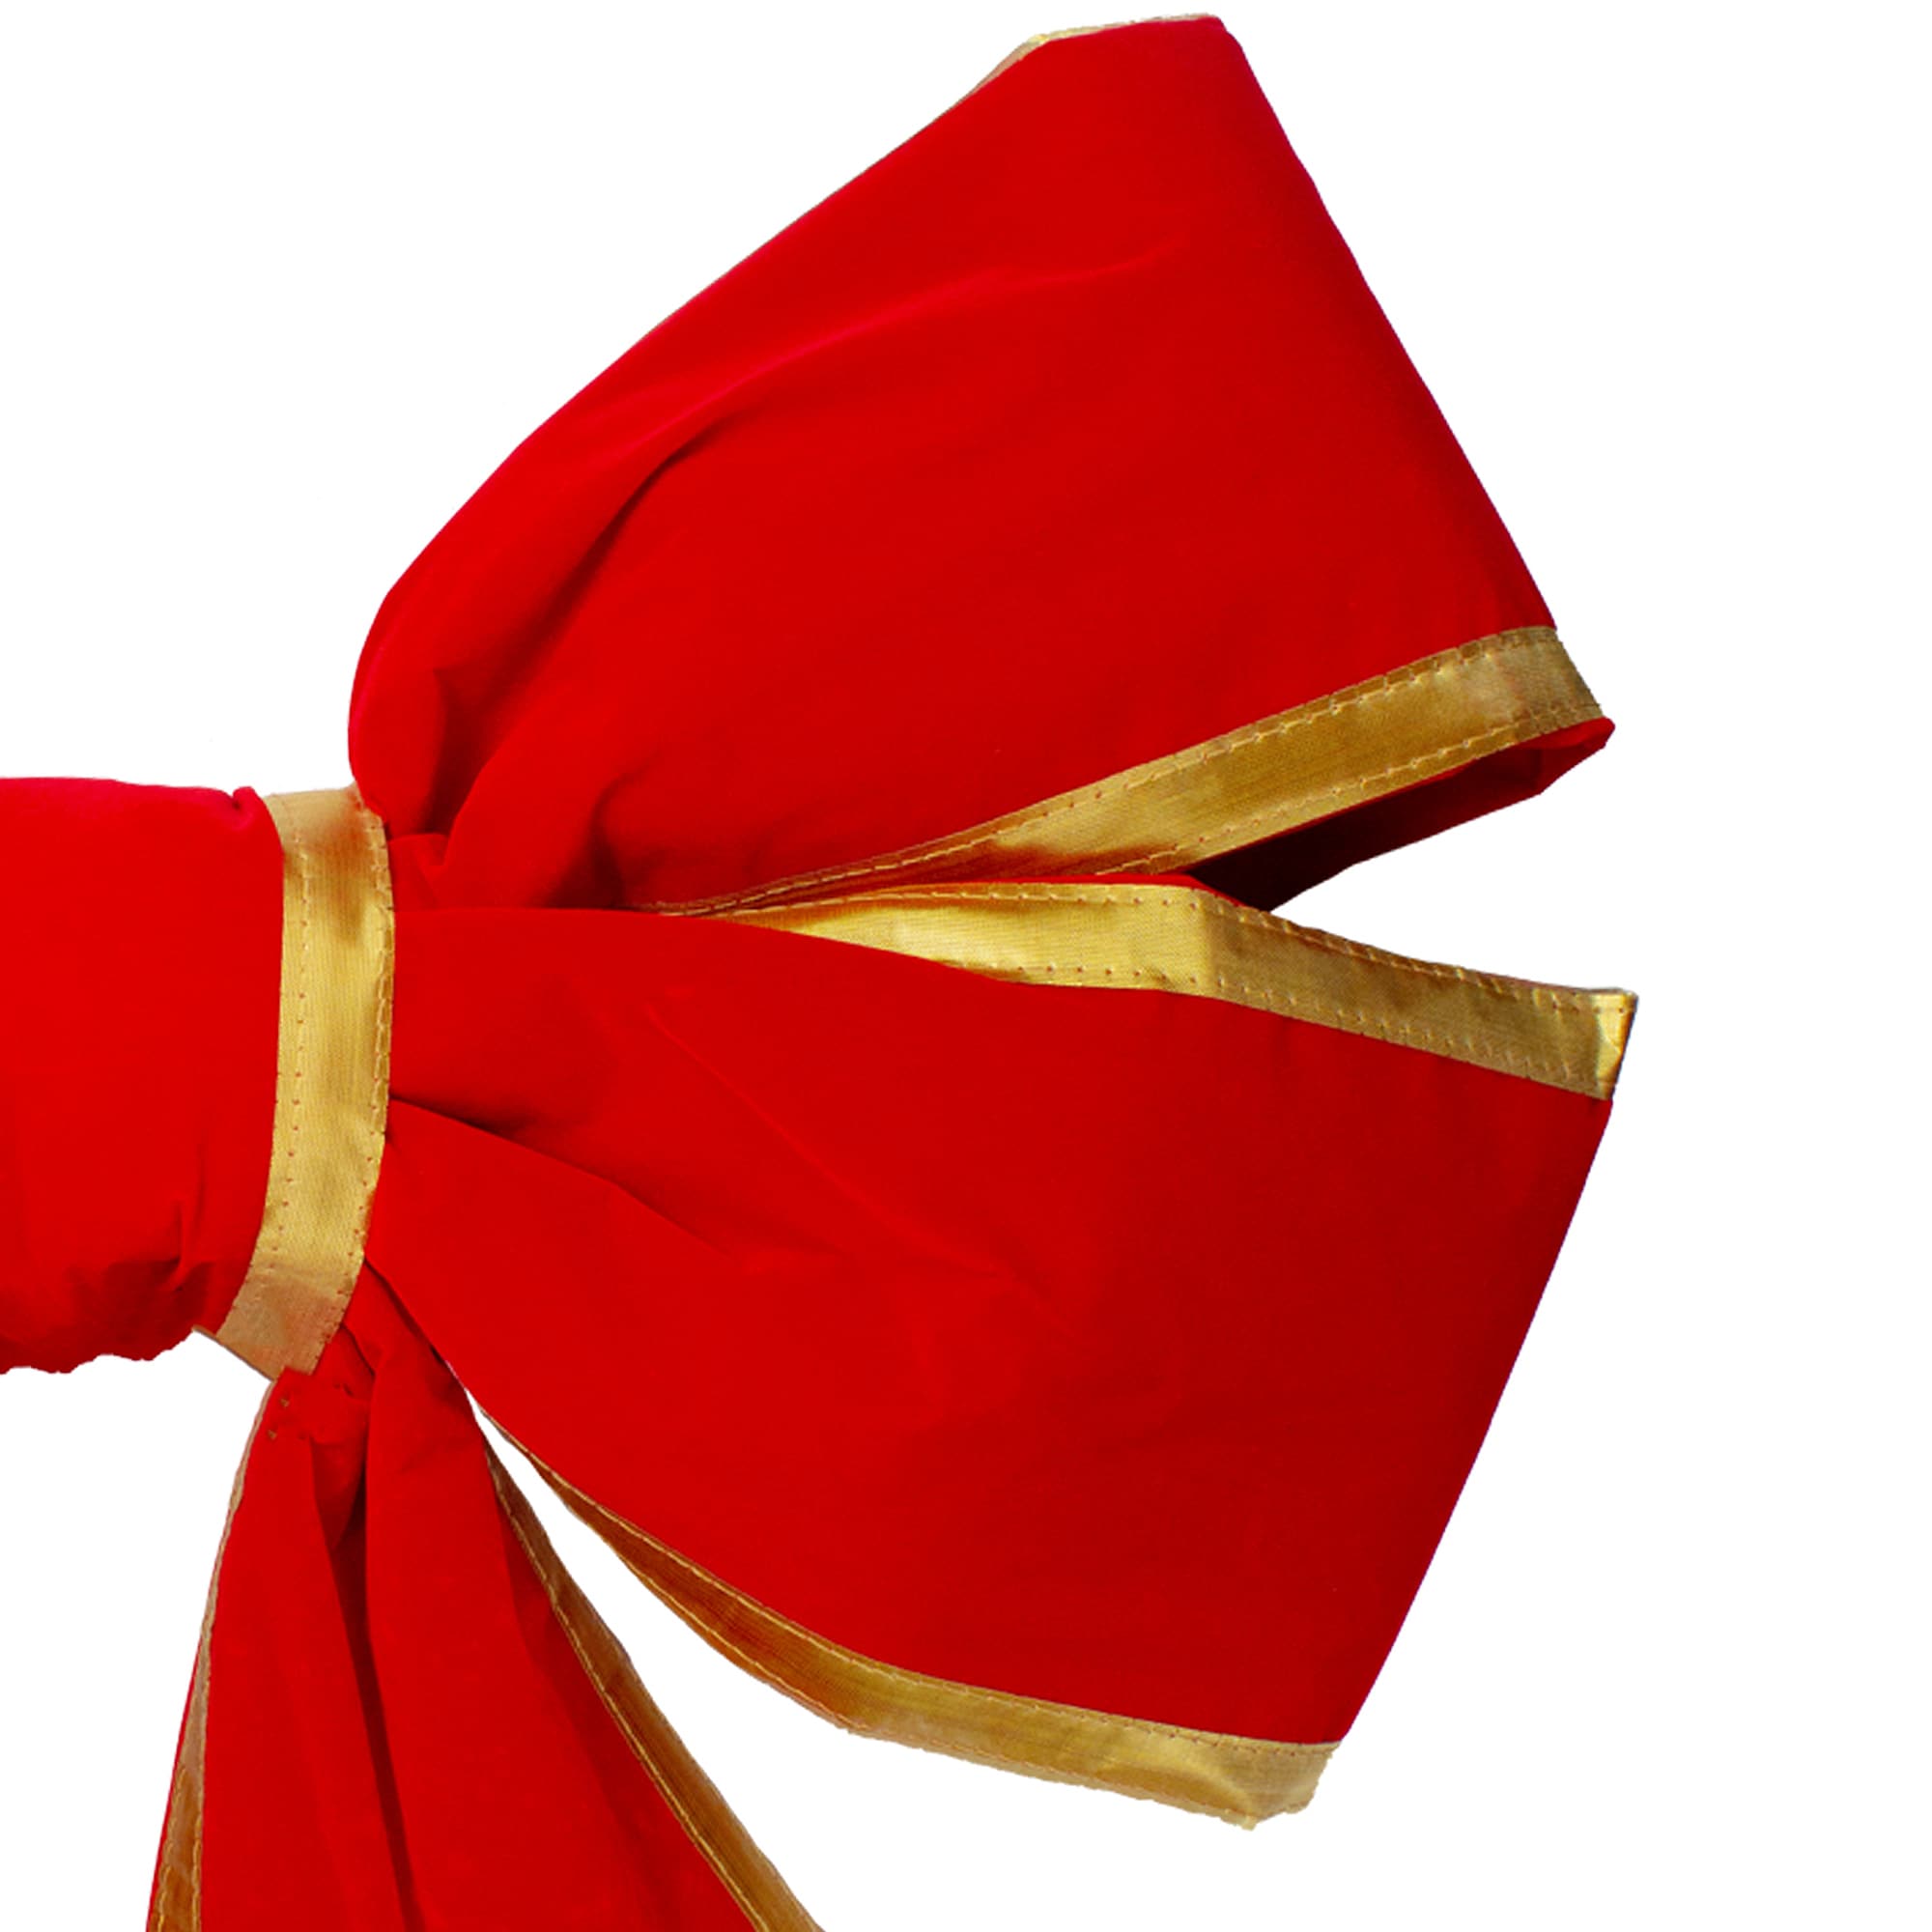 Red Sleigh 24-in Red Commercial Velvet Indoor Christmas Bow - Large 4-Loop  Design with 30-in Tails in the Decorative Bows & Ribbon department at